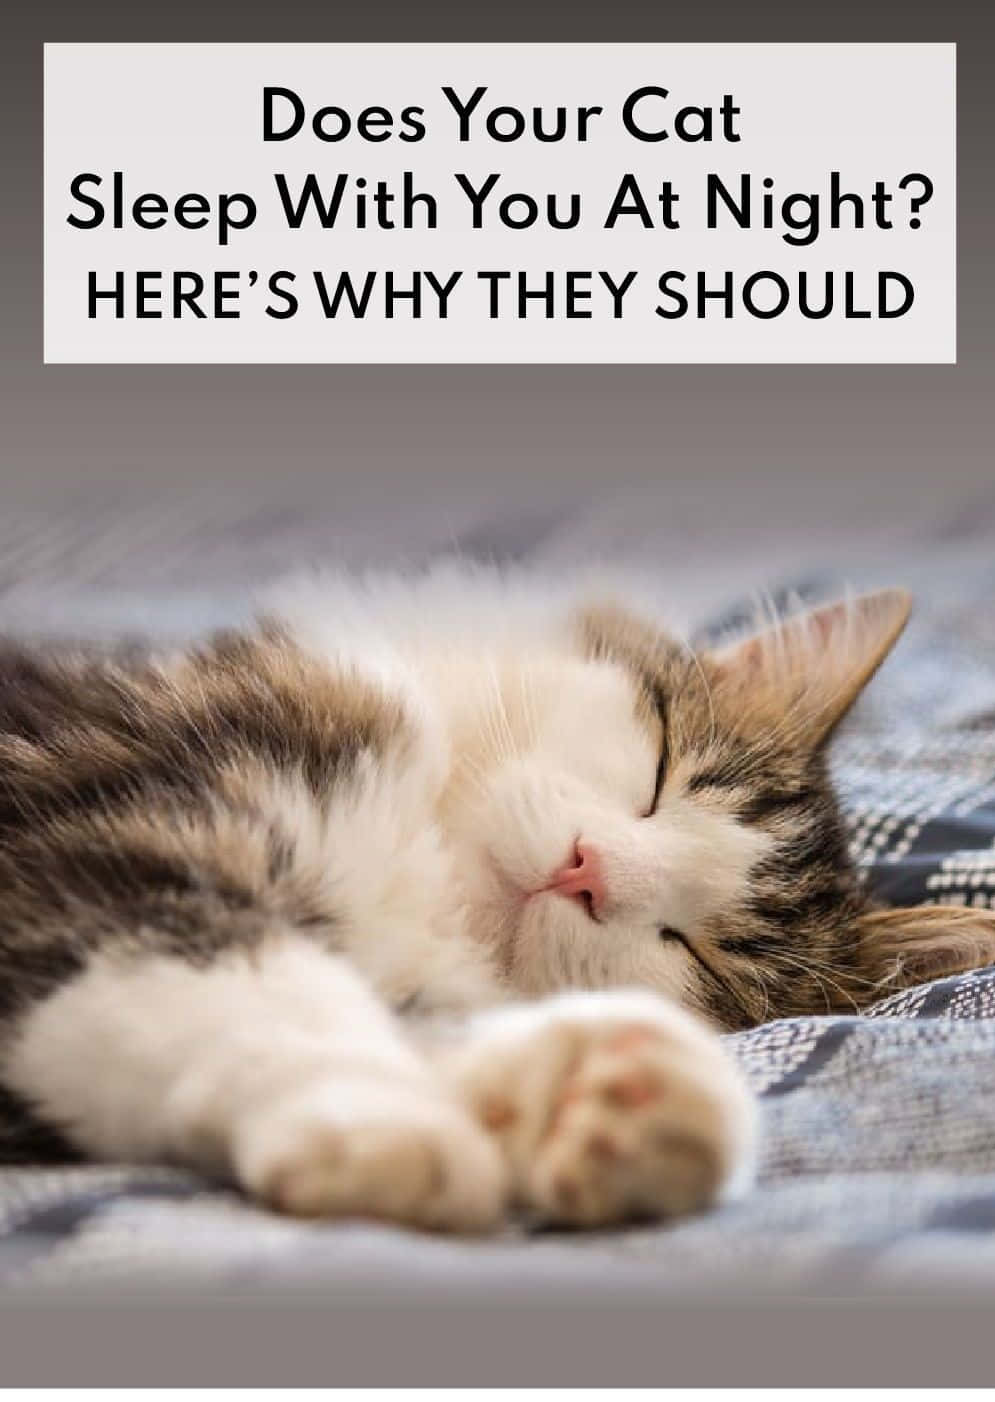 Does Your Cat Sleep With You At Night? Here's Why They Should